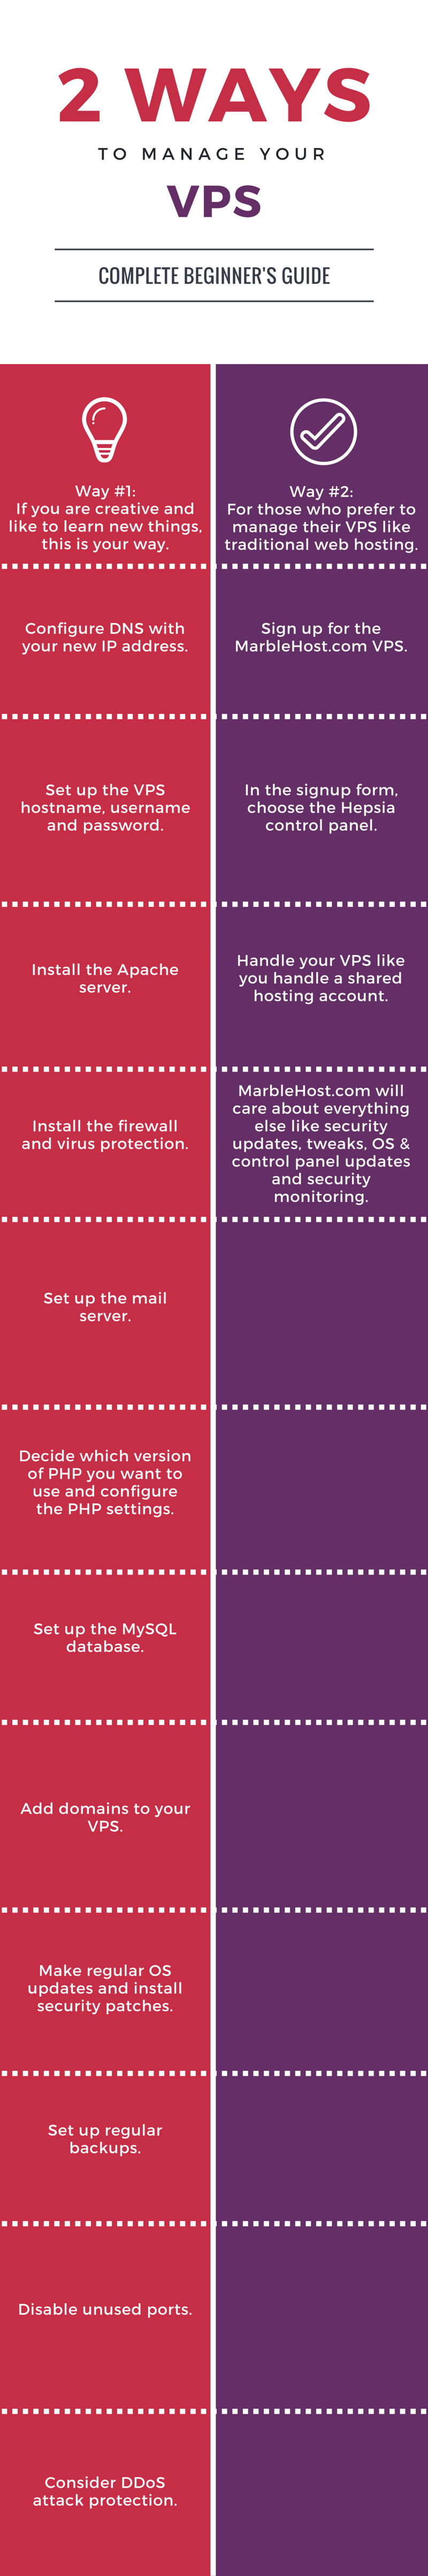 Infographic: 2 ways to manage your own VPS